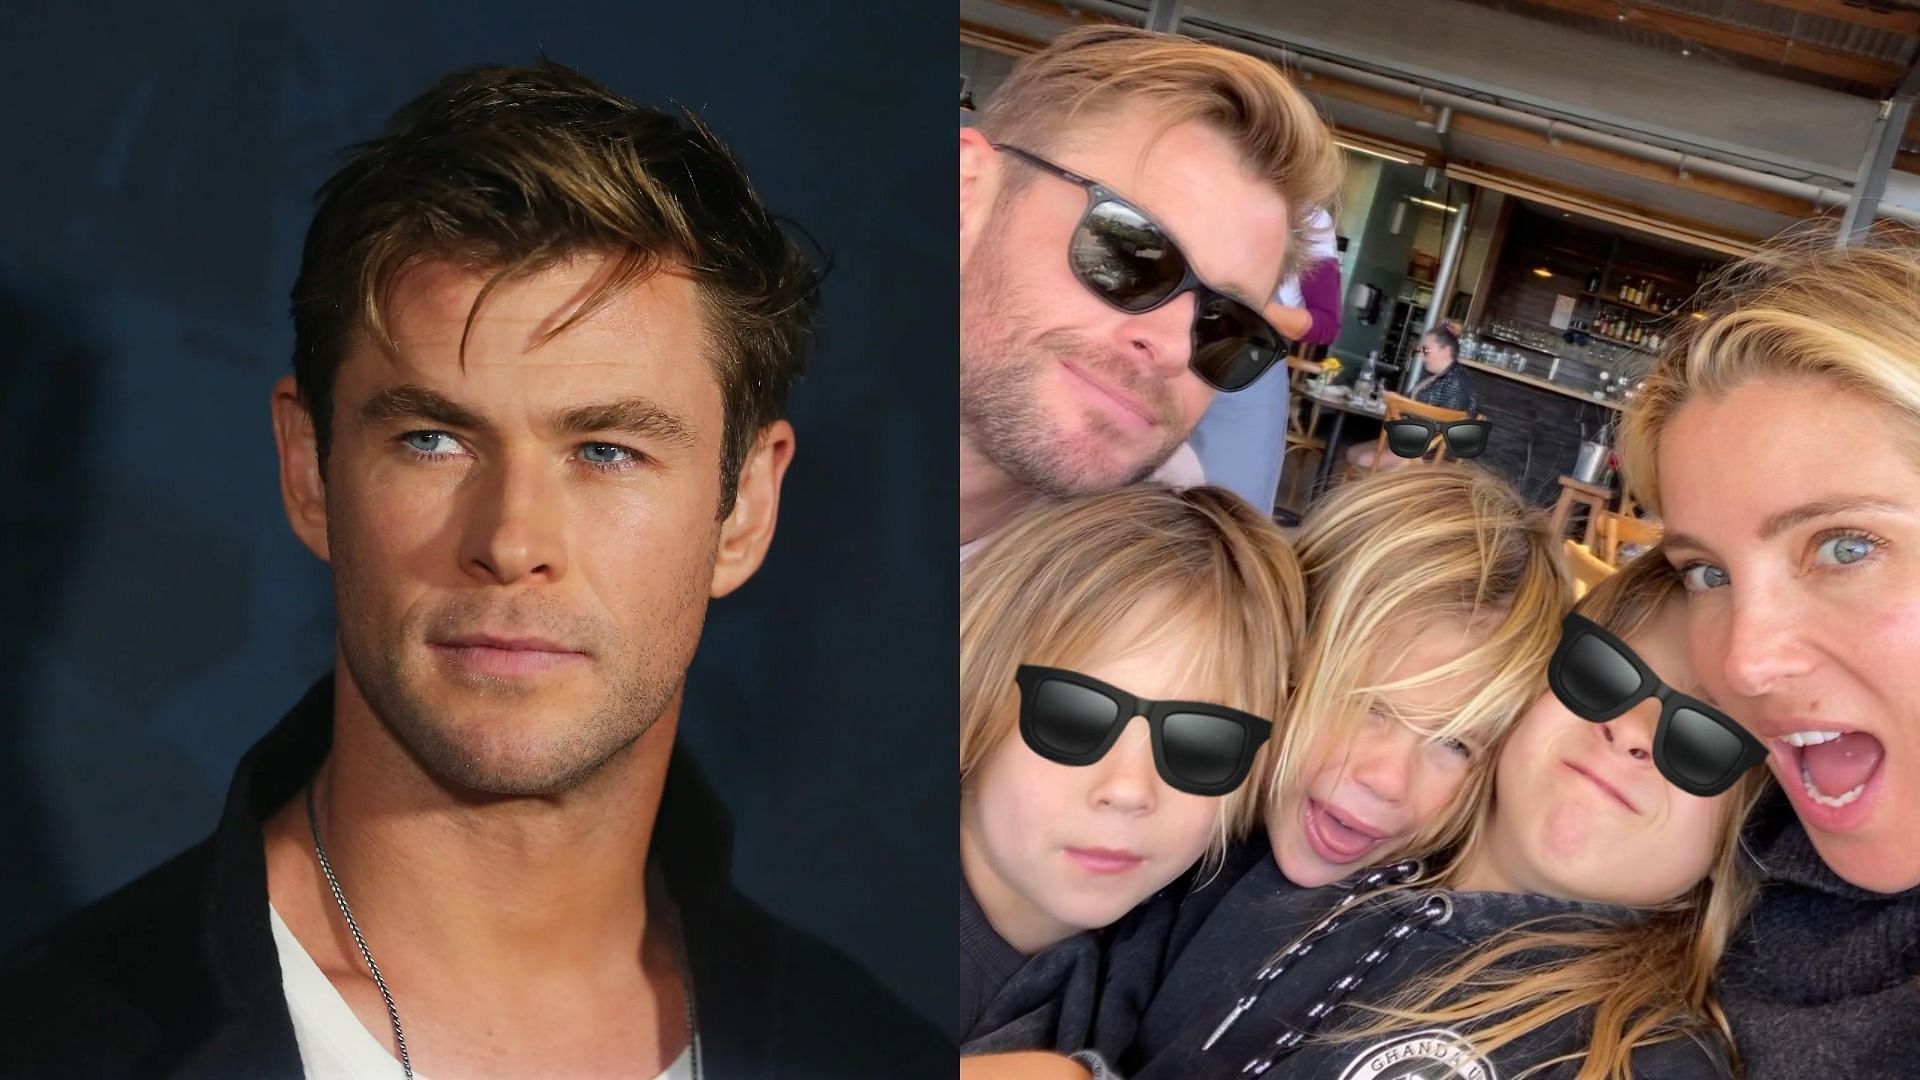 Chris Hemsworth, Elsa Pataky and their children (Images via Don Arnold/Getty Images and Elsa Pataky/Instagram)